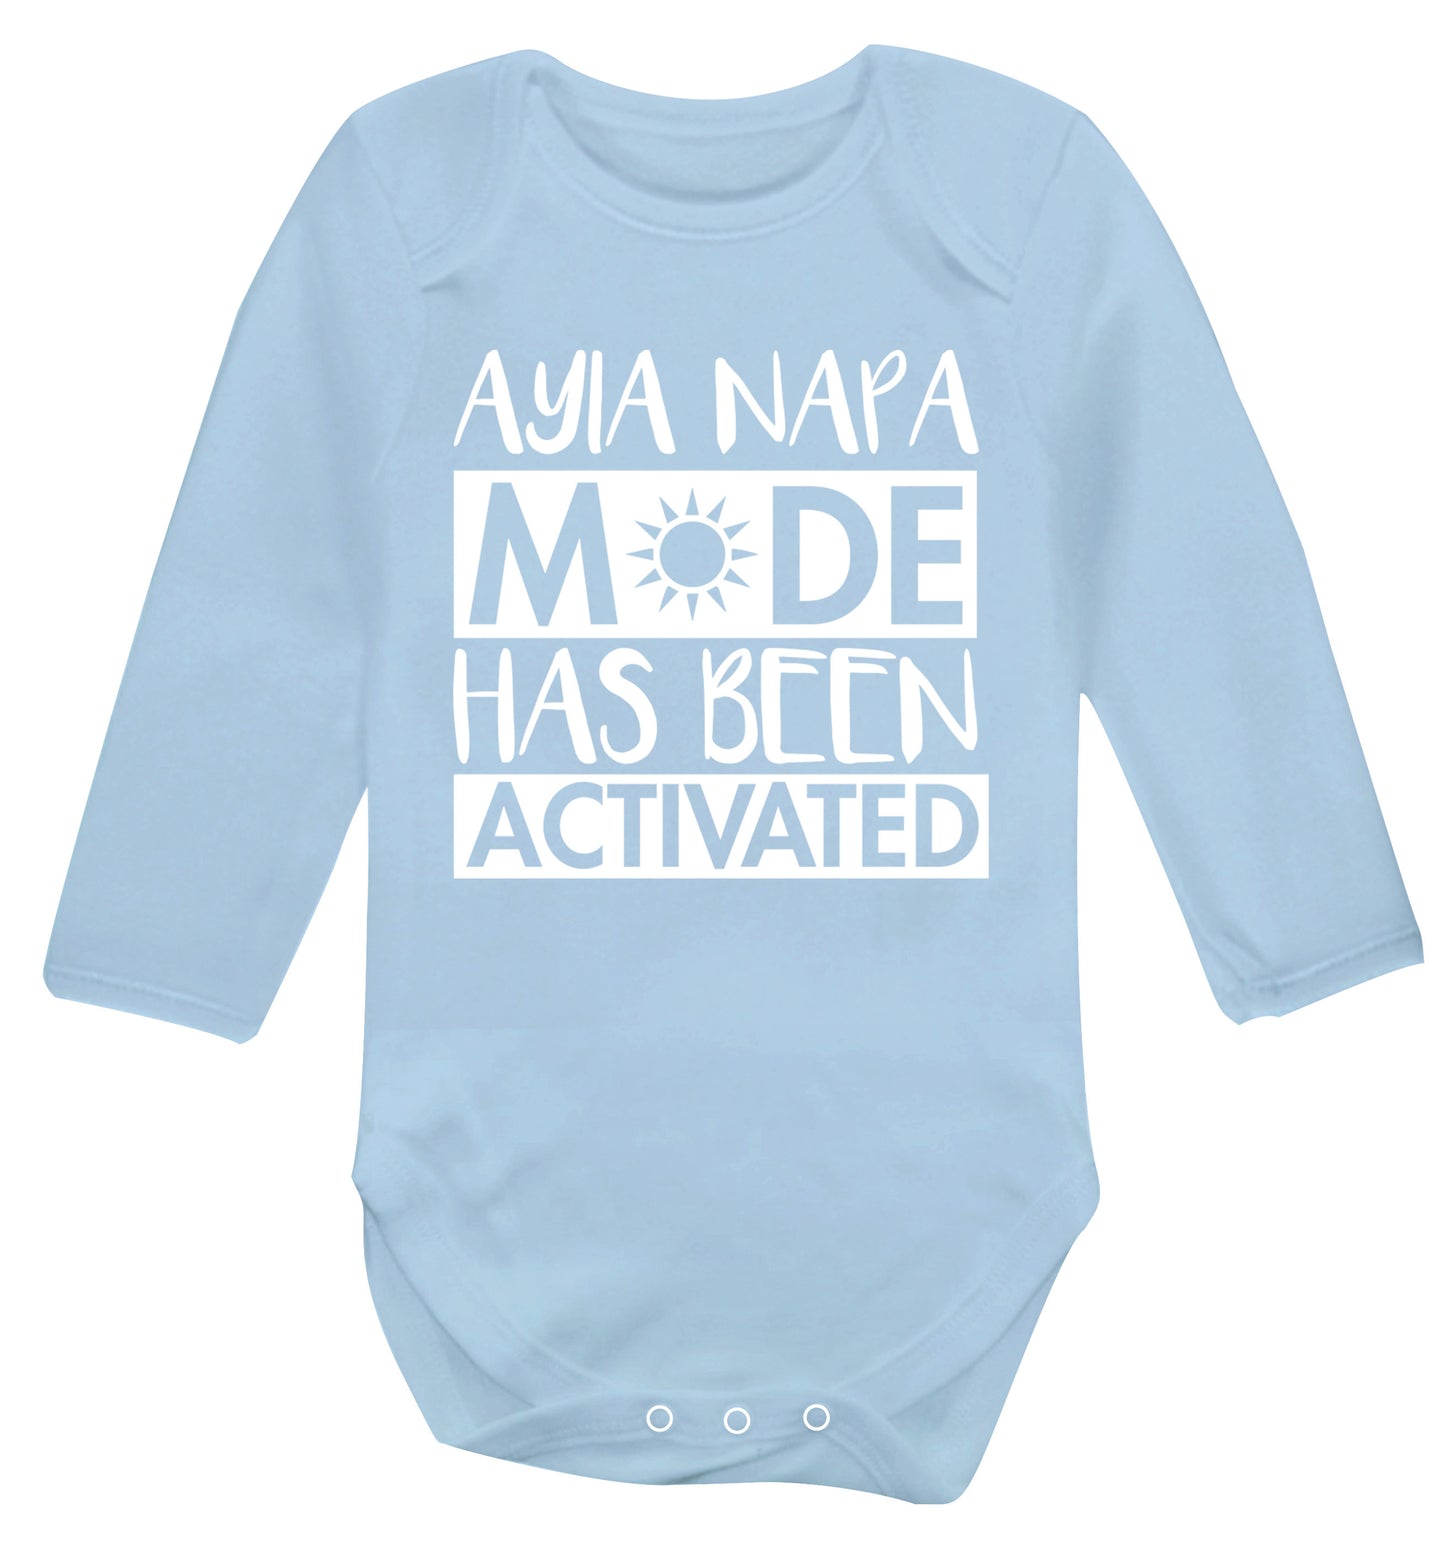 Aiya Napa mode has been activated Baby Vest long sleeved pale blue 6-12 months